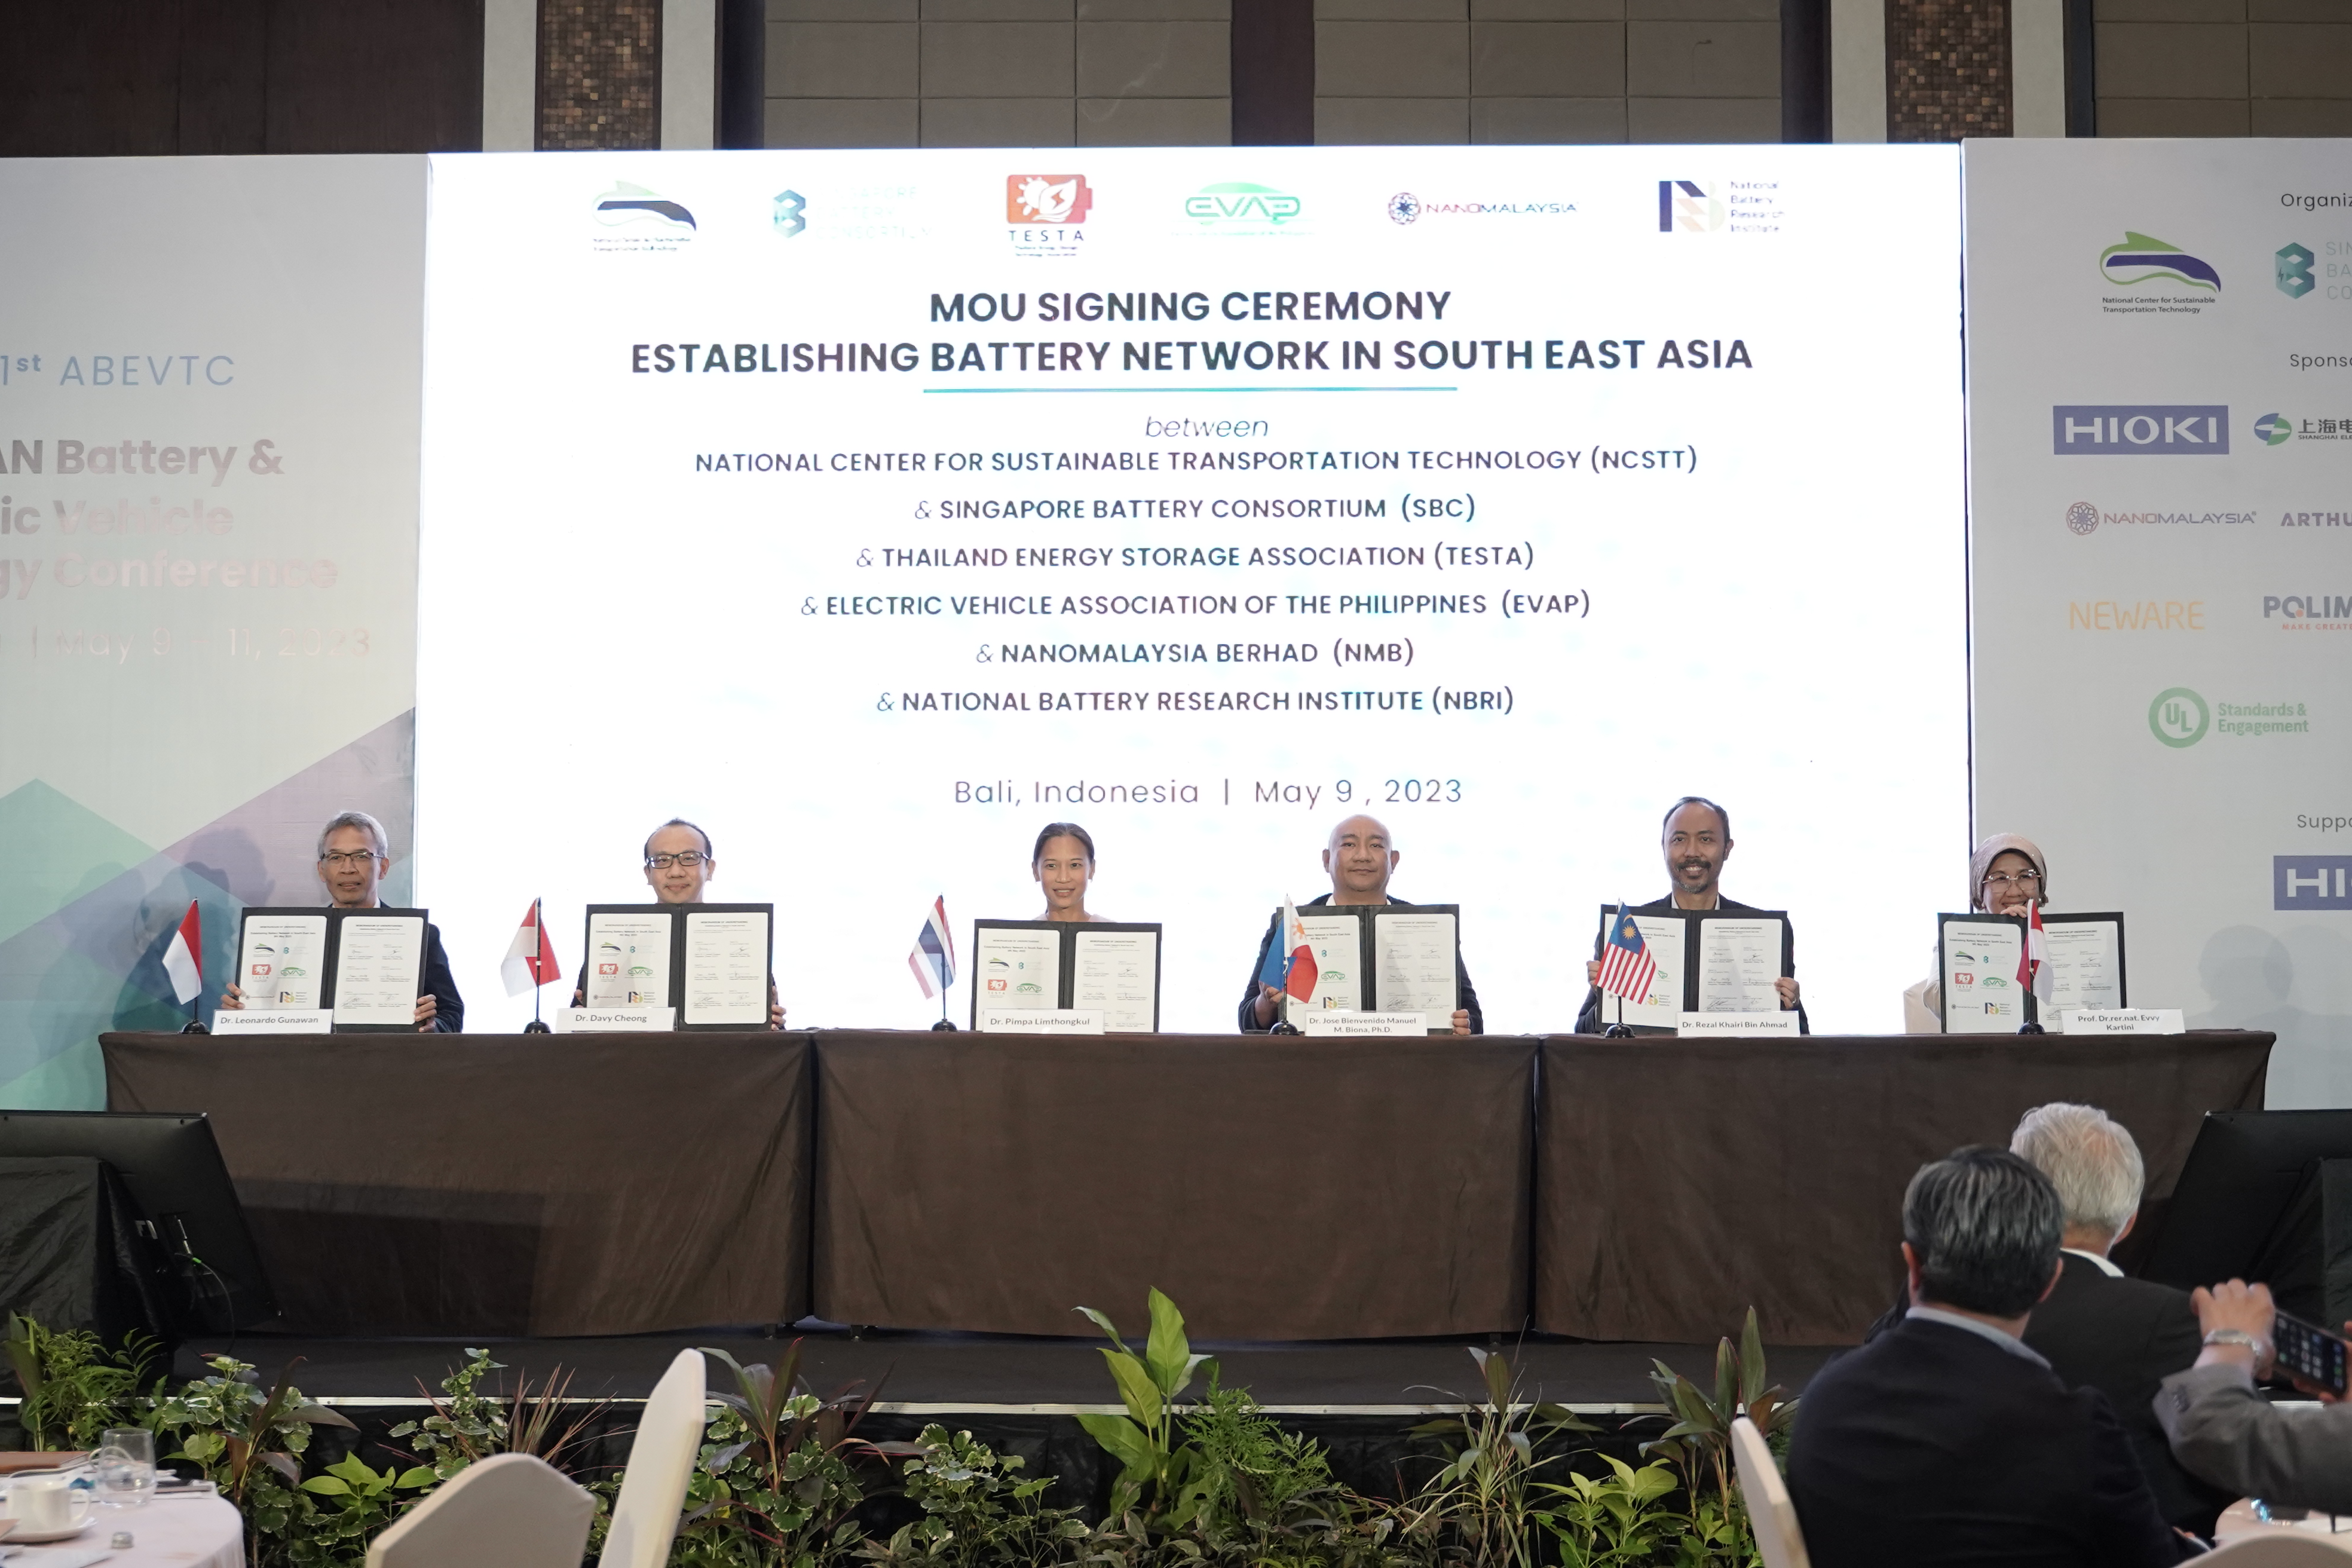 1st ever ASEAN Battery and Electric Vehicle Technology Conference Aimed Towards Forging Vibrant Ecosystems and Strengthening Partnerships